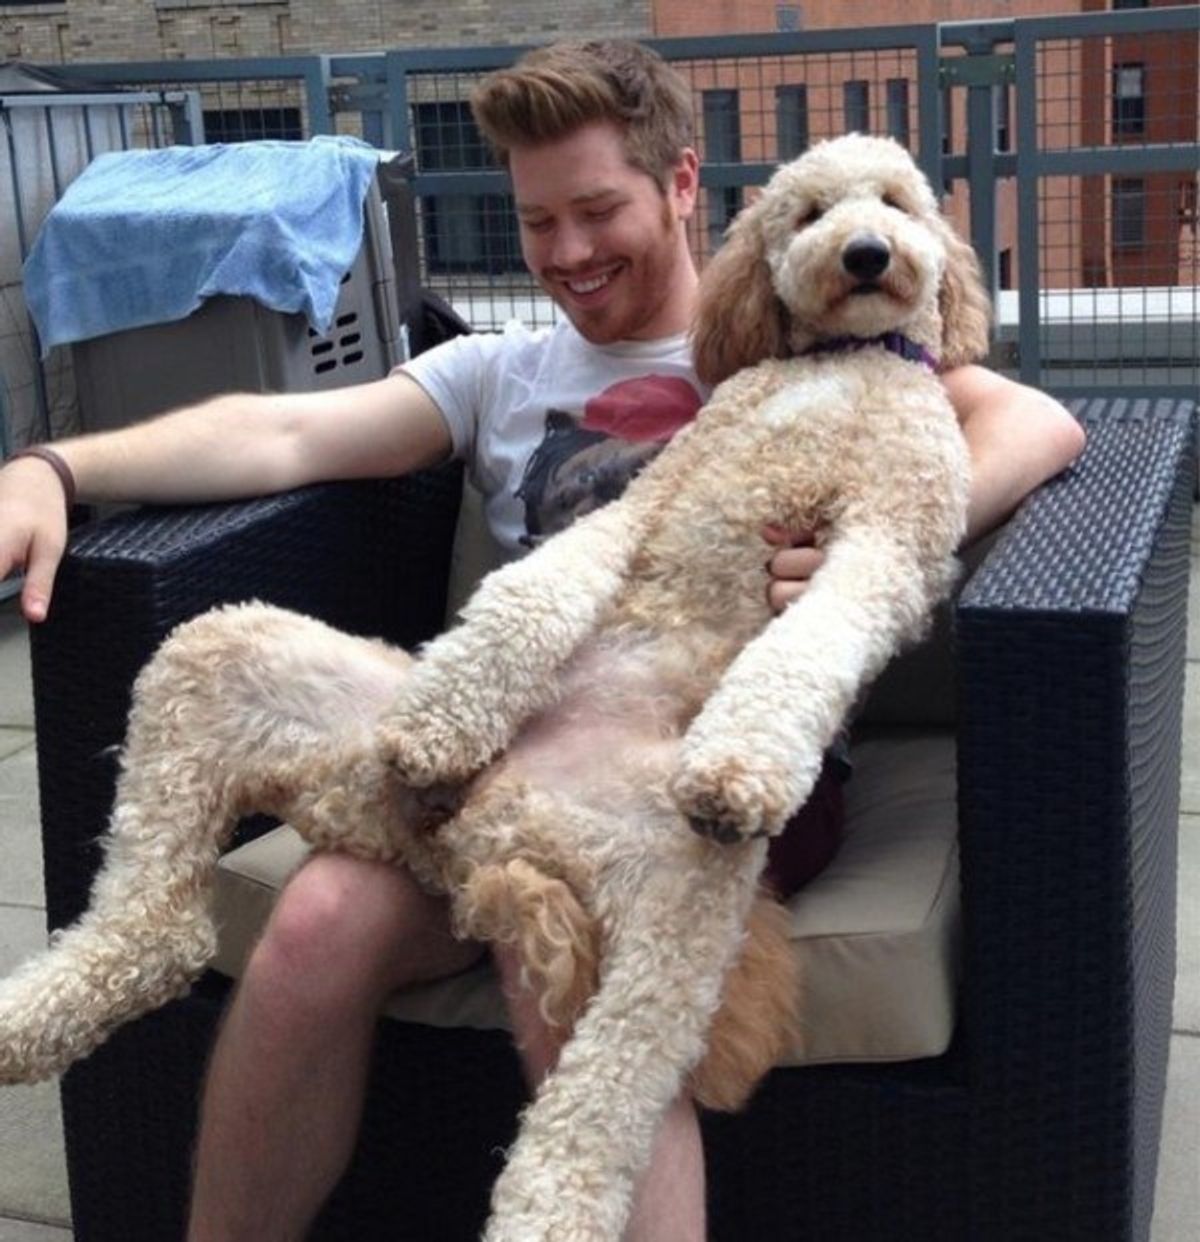 15 Things All People With Large Dogs Know To Be True